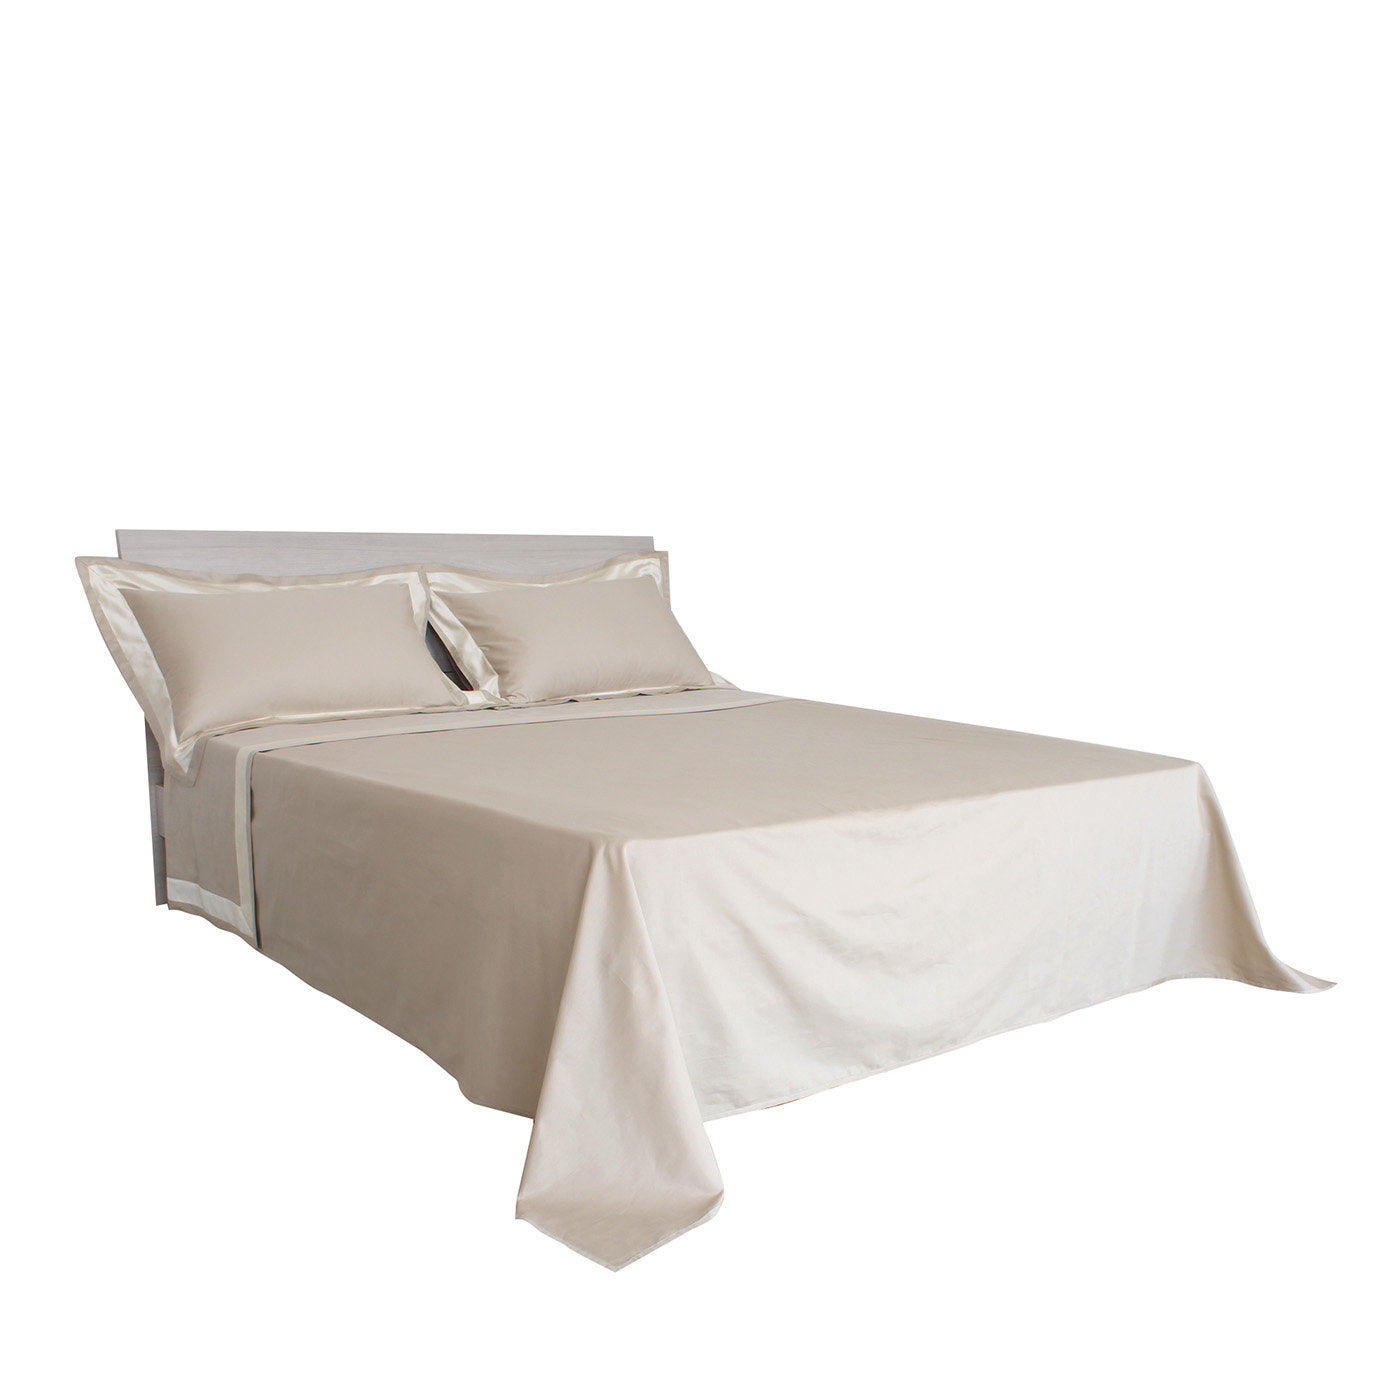 Sand King Size Sheet Set with Pillowcases - Main view